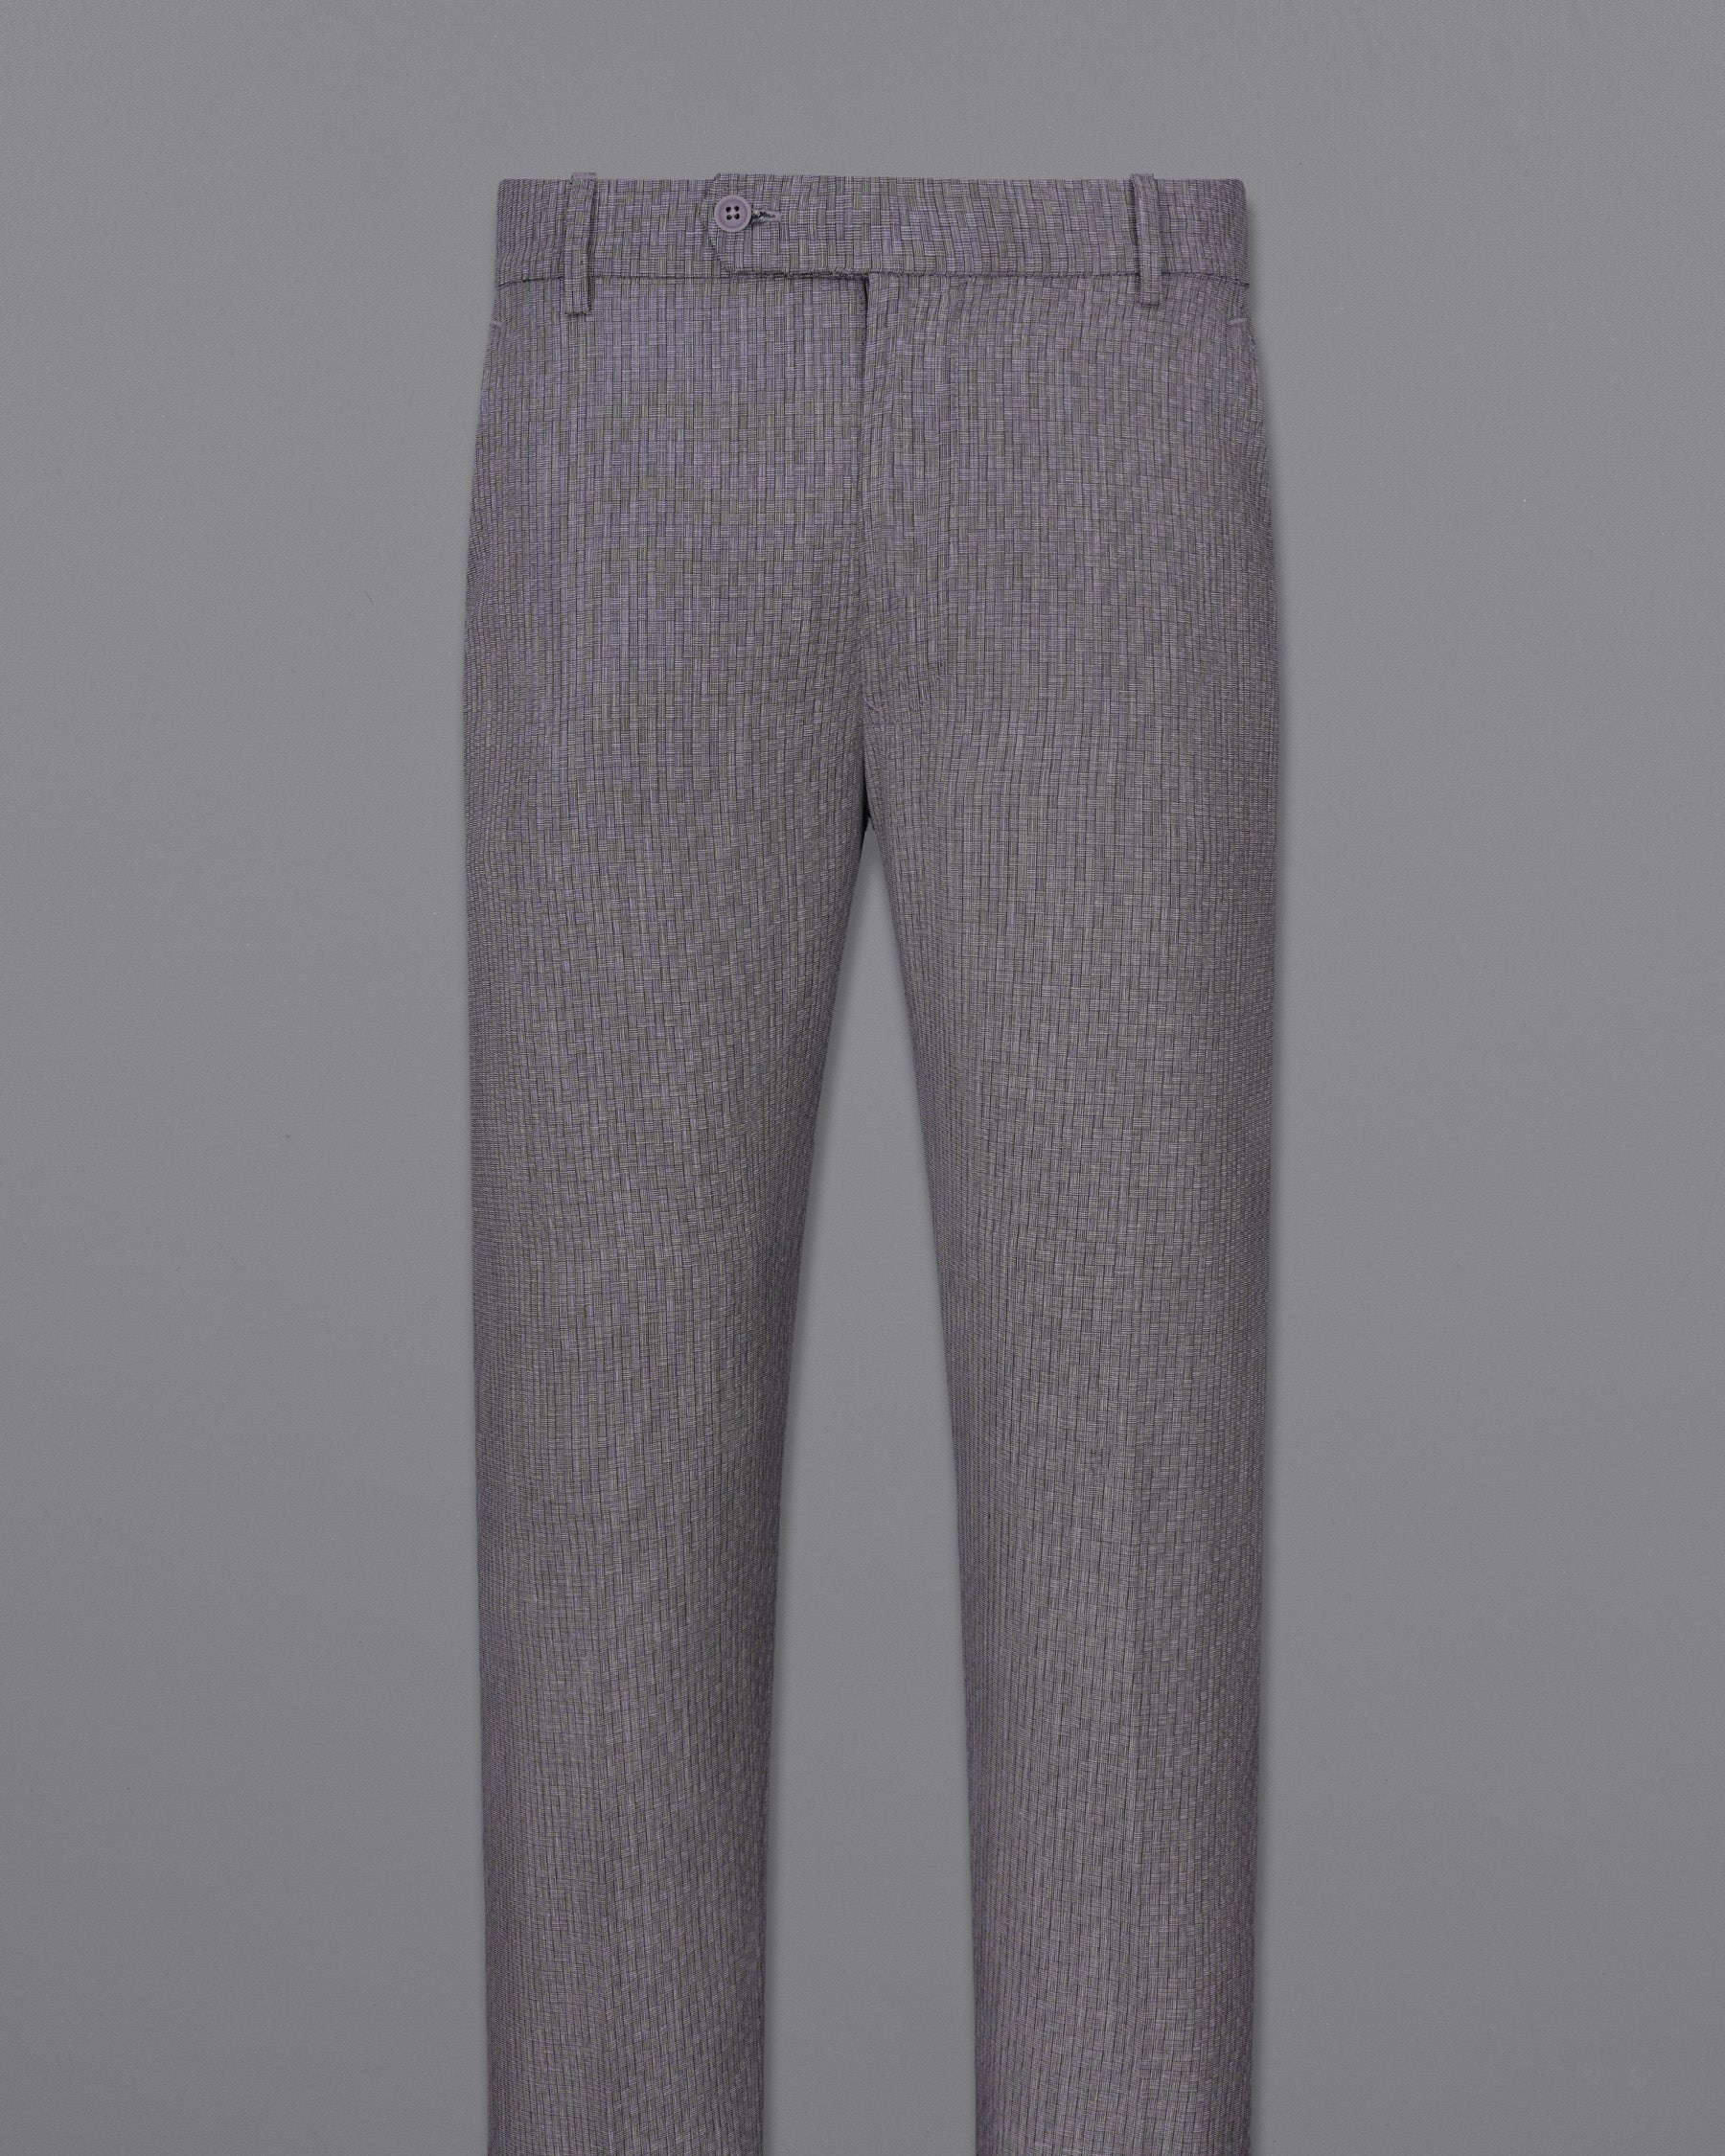 Mobster Gray Textured Pant T2002-28, T2002-30, T2002-32, T2002-34, T2002-36, T2002-38, T2002-40, T2002-42, T2002-44